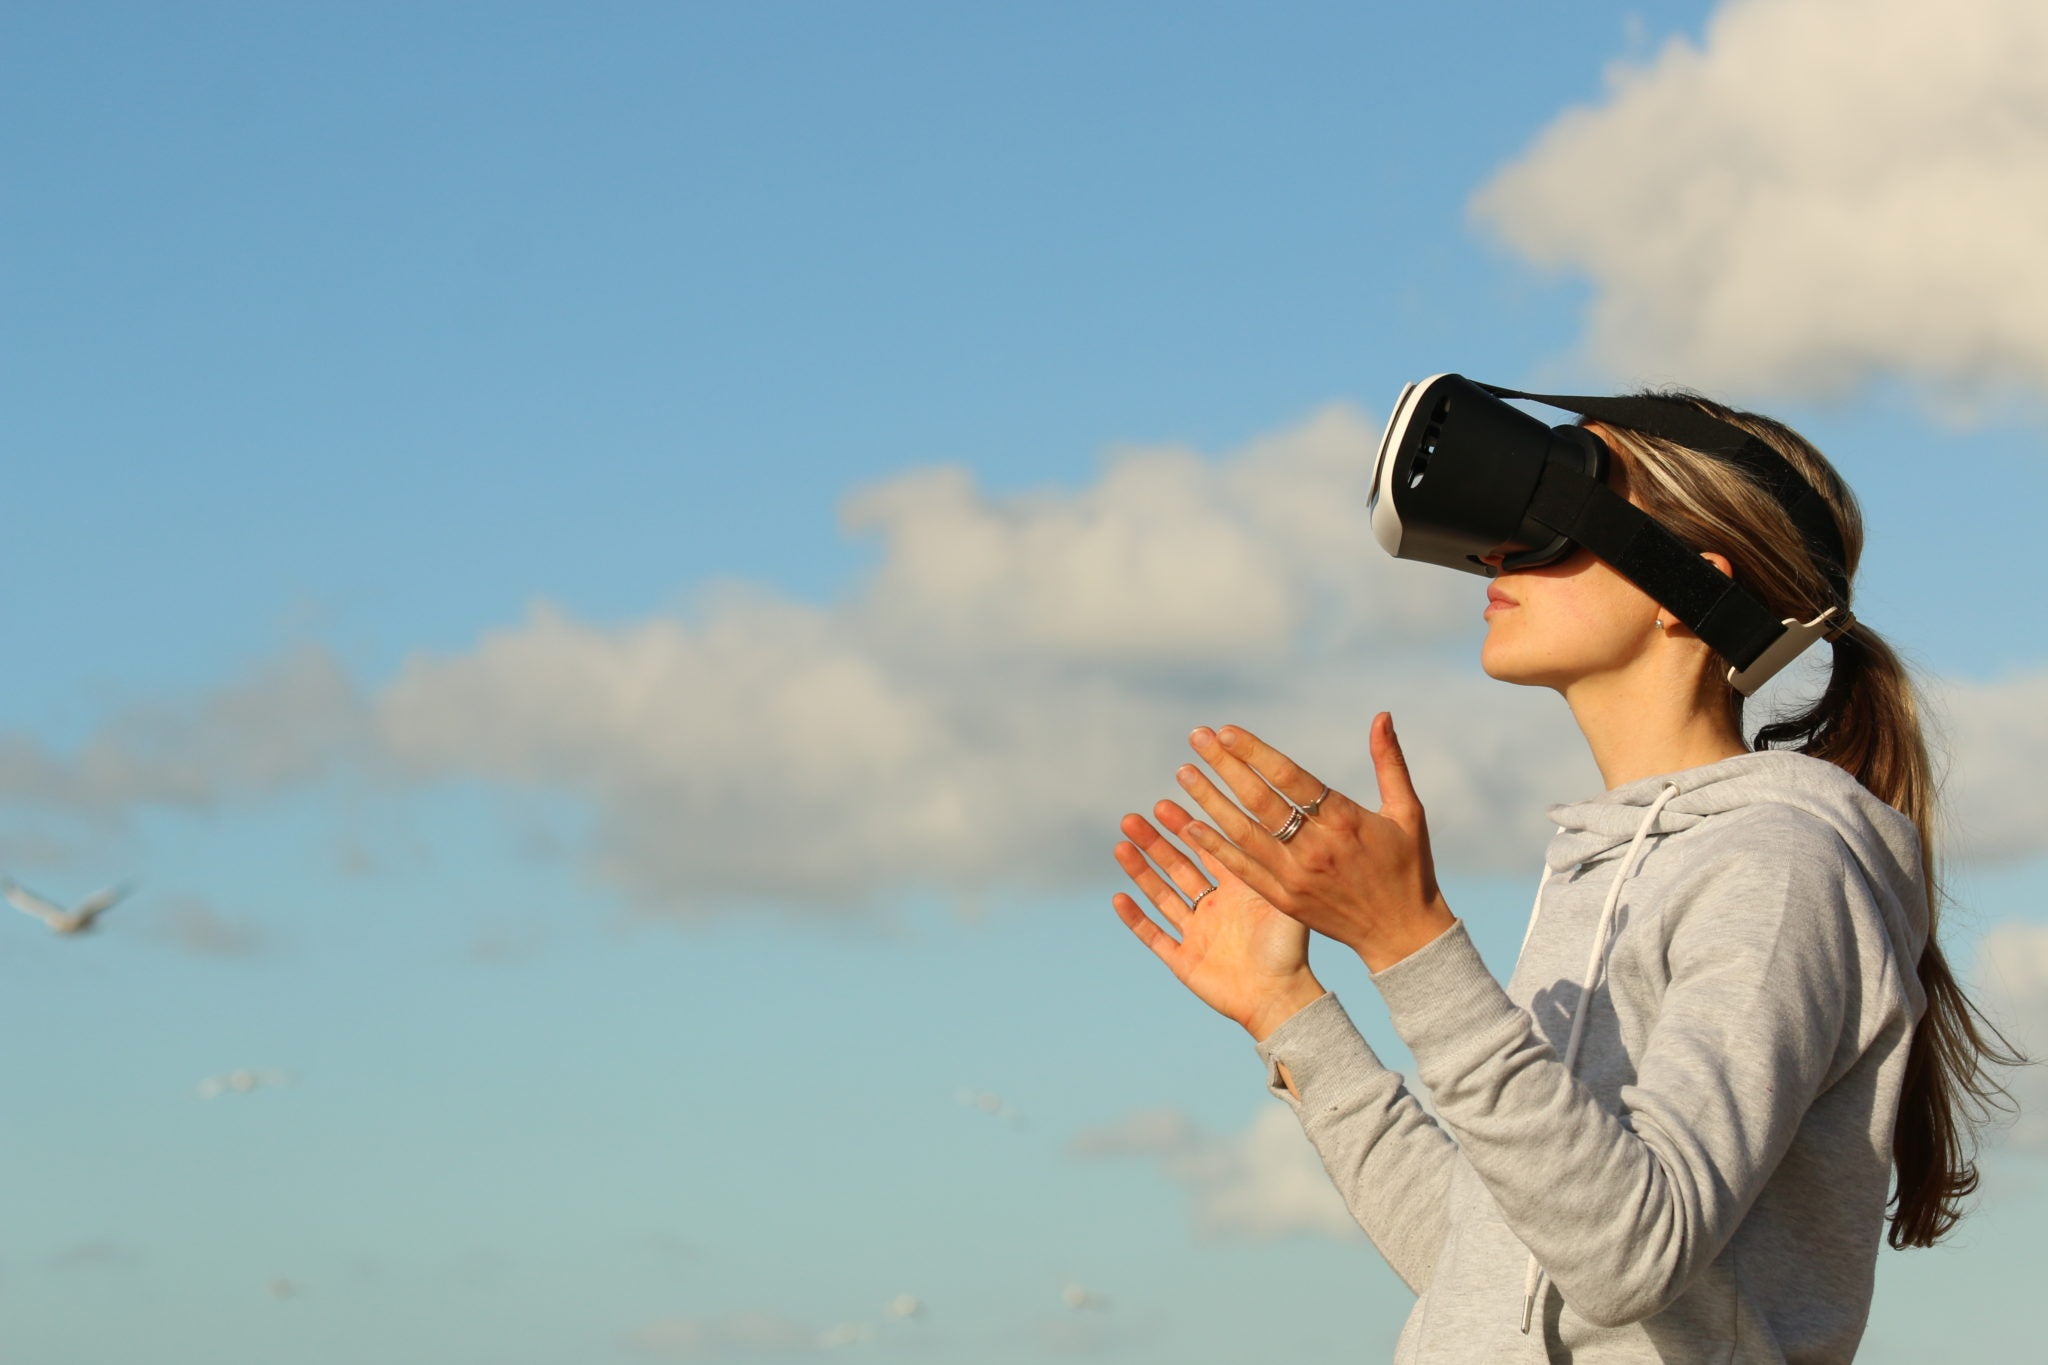 Top 6 Outrageous Uses for Virtual Reality